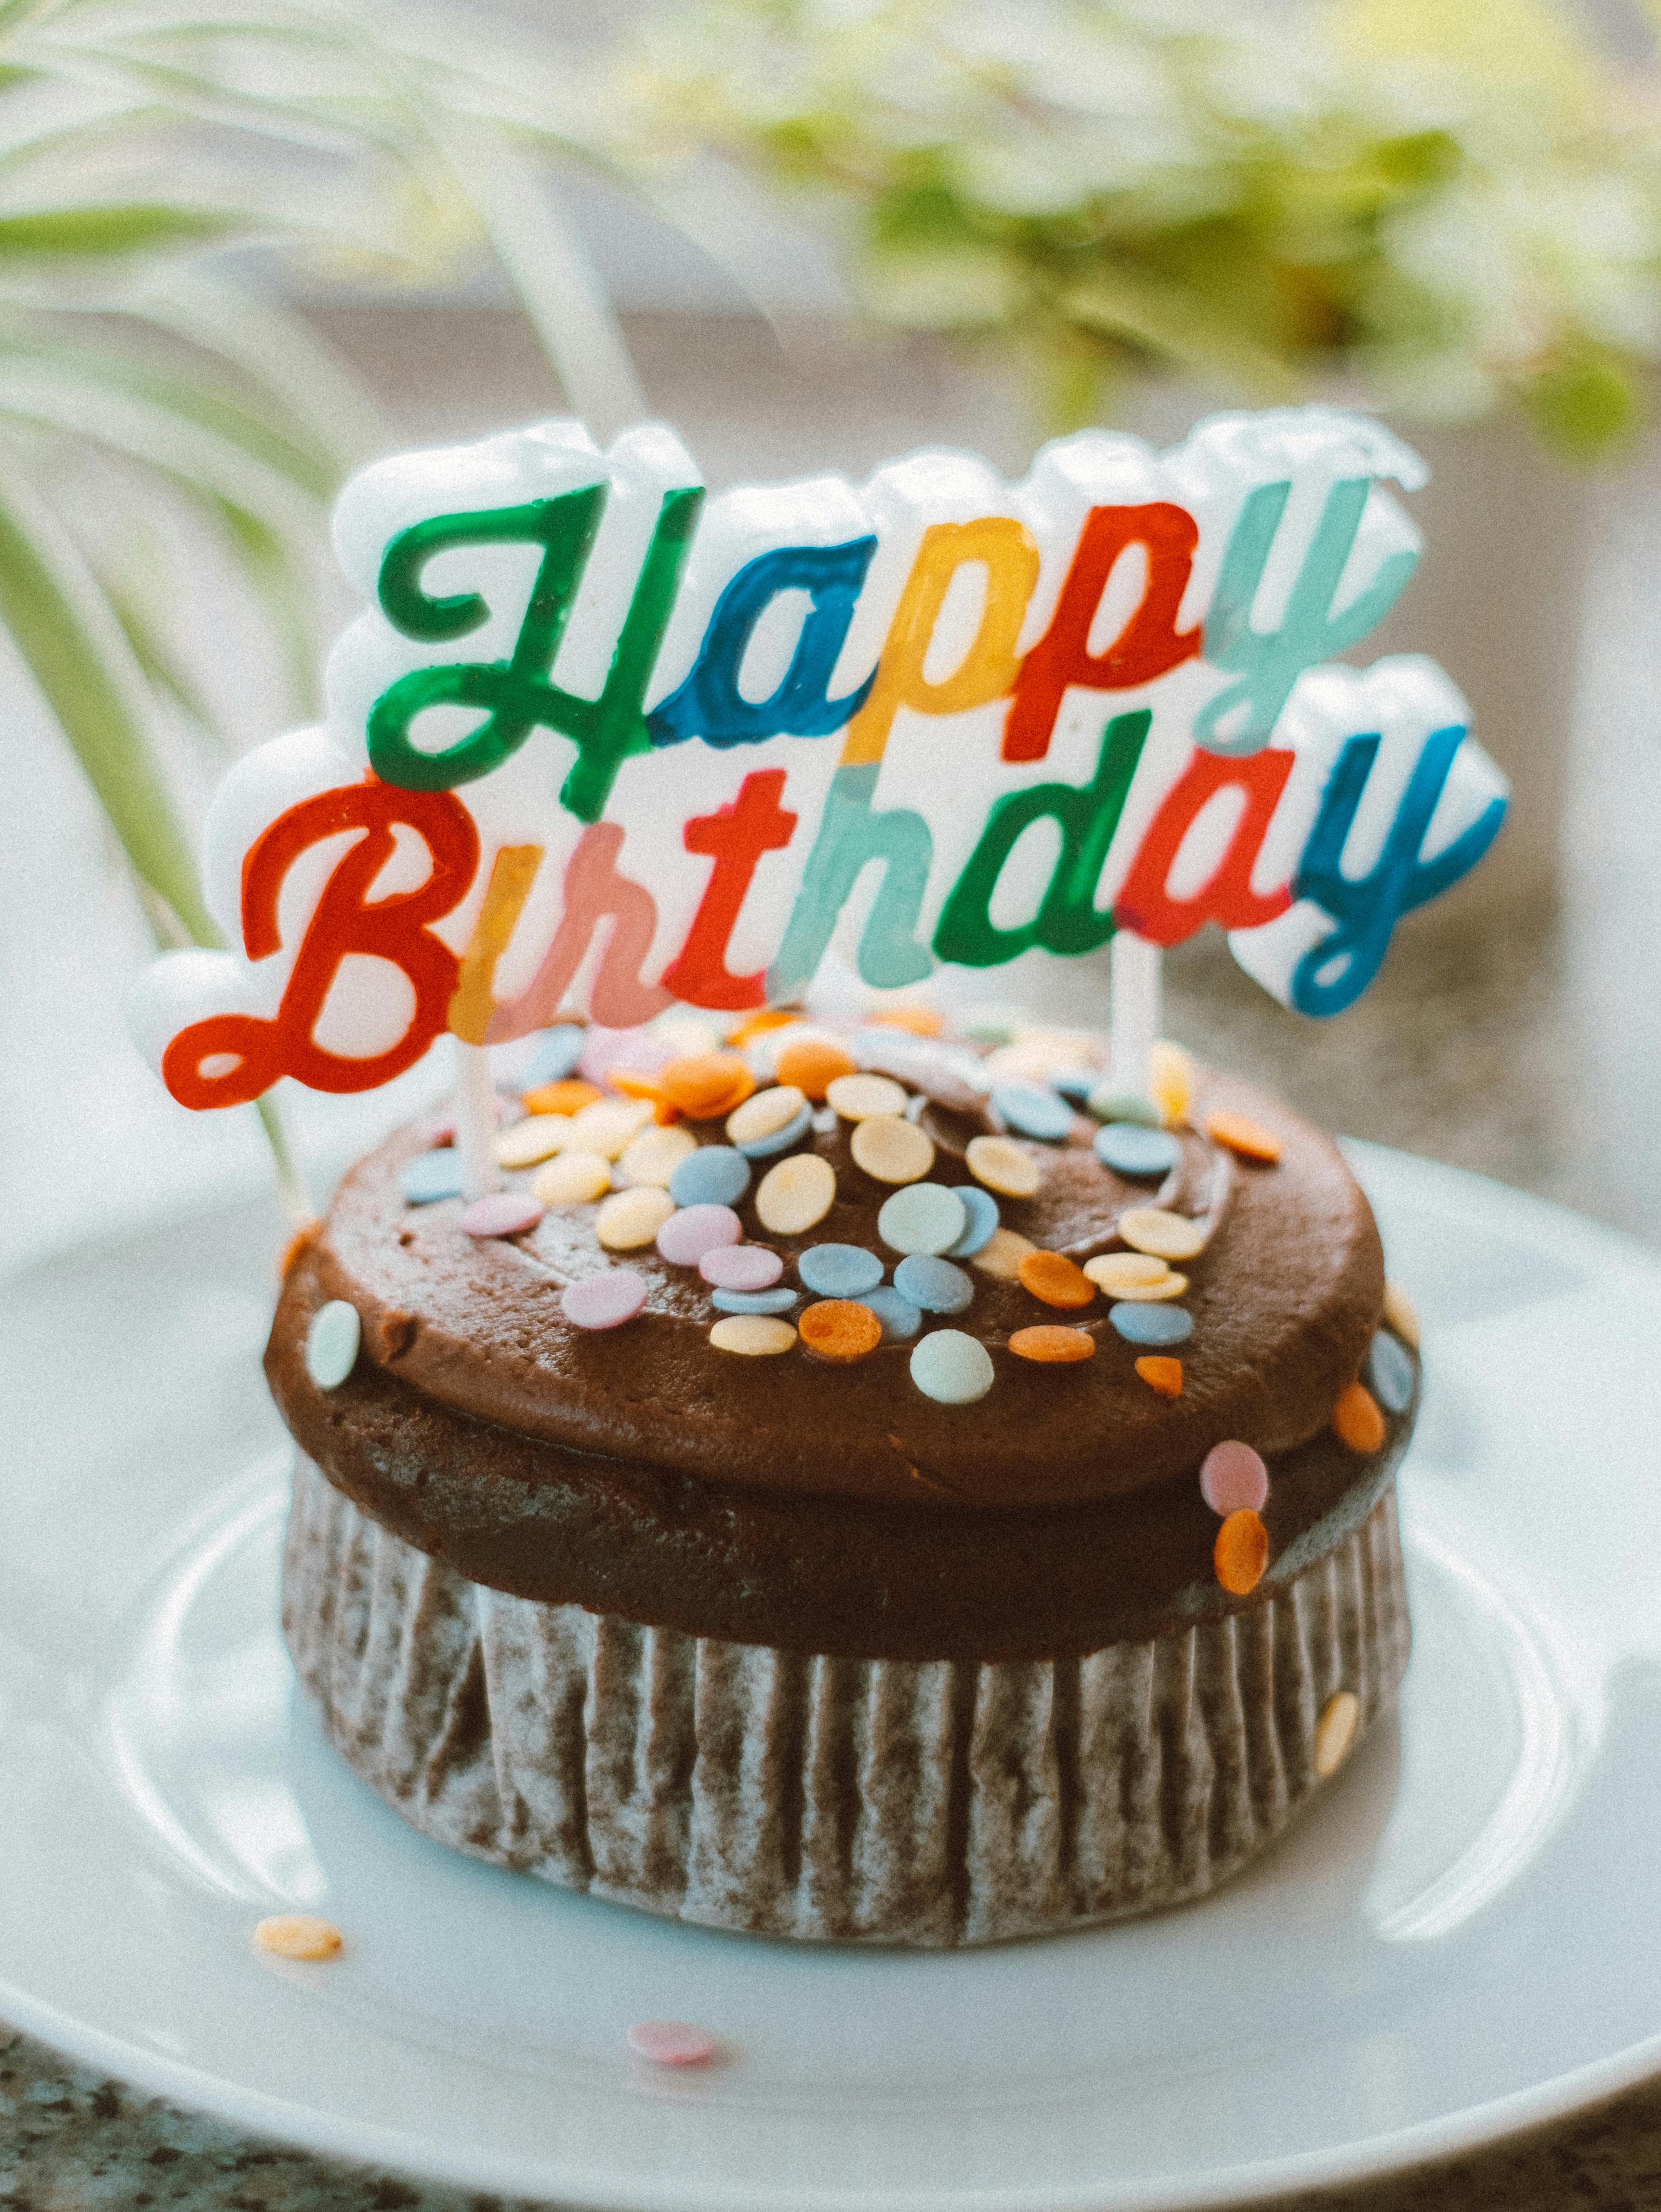 100+] Happy Birthday Cake Pictures | Wallpapers.com